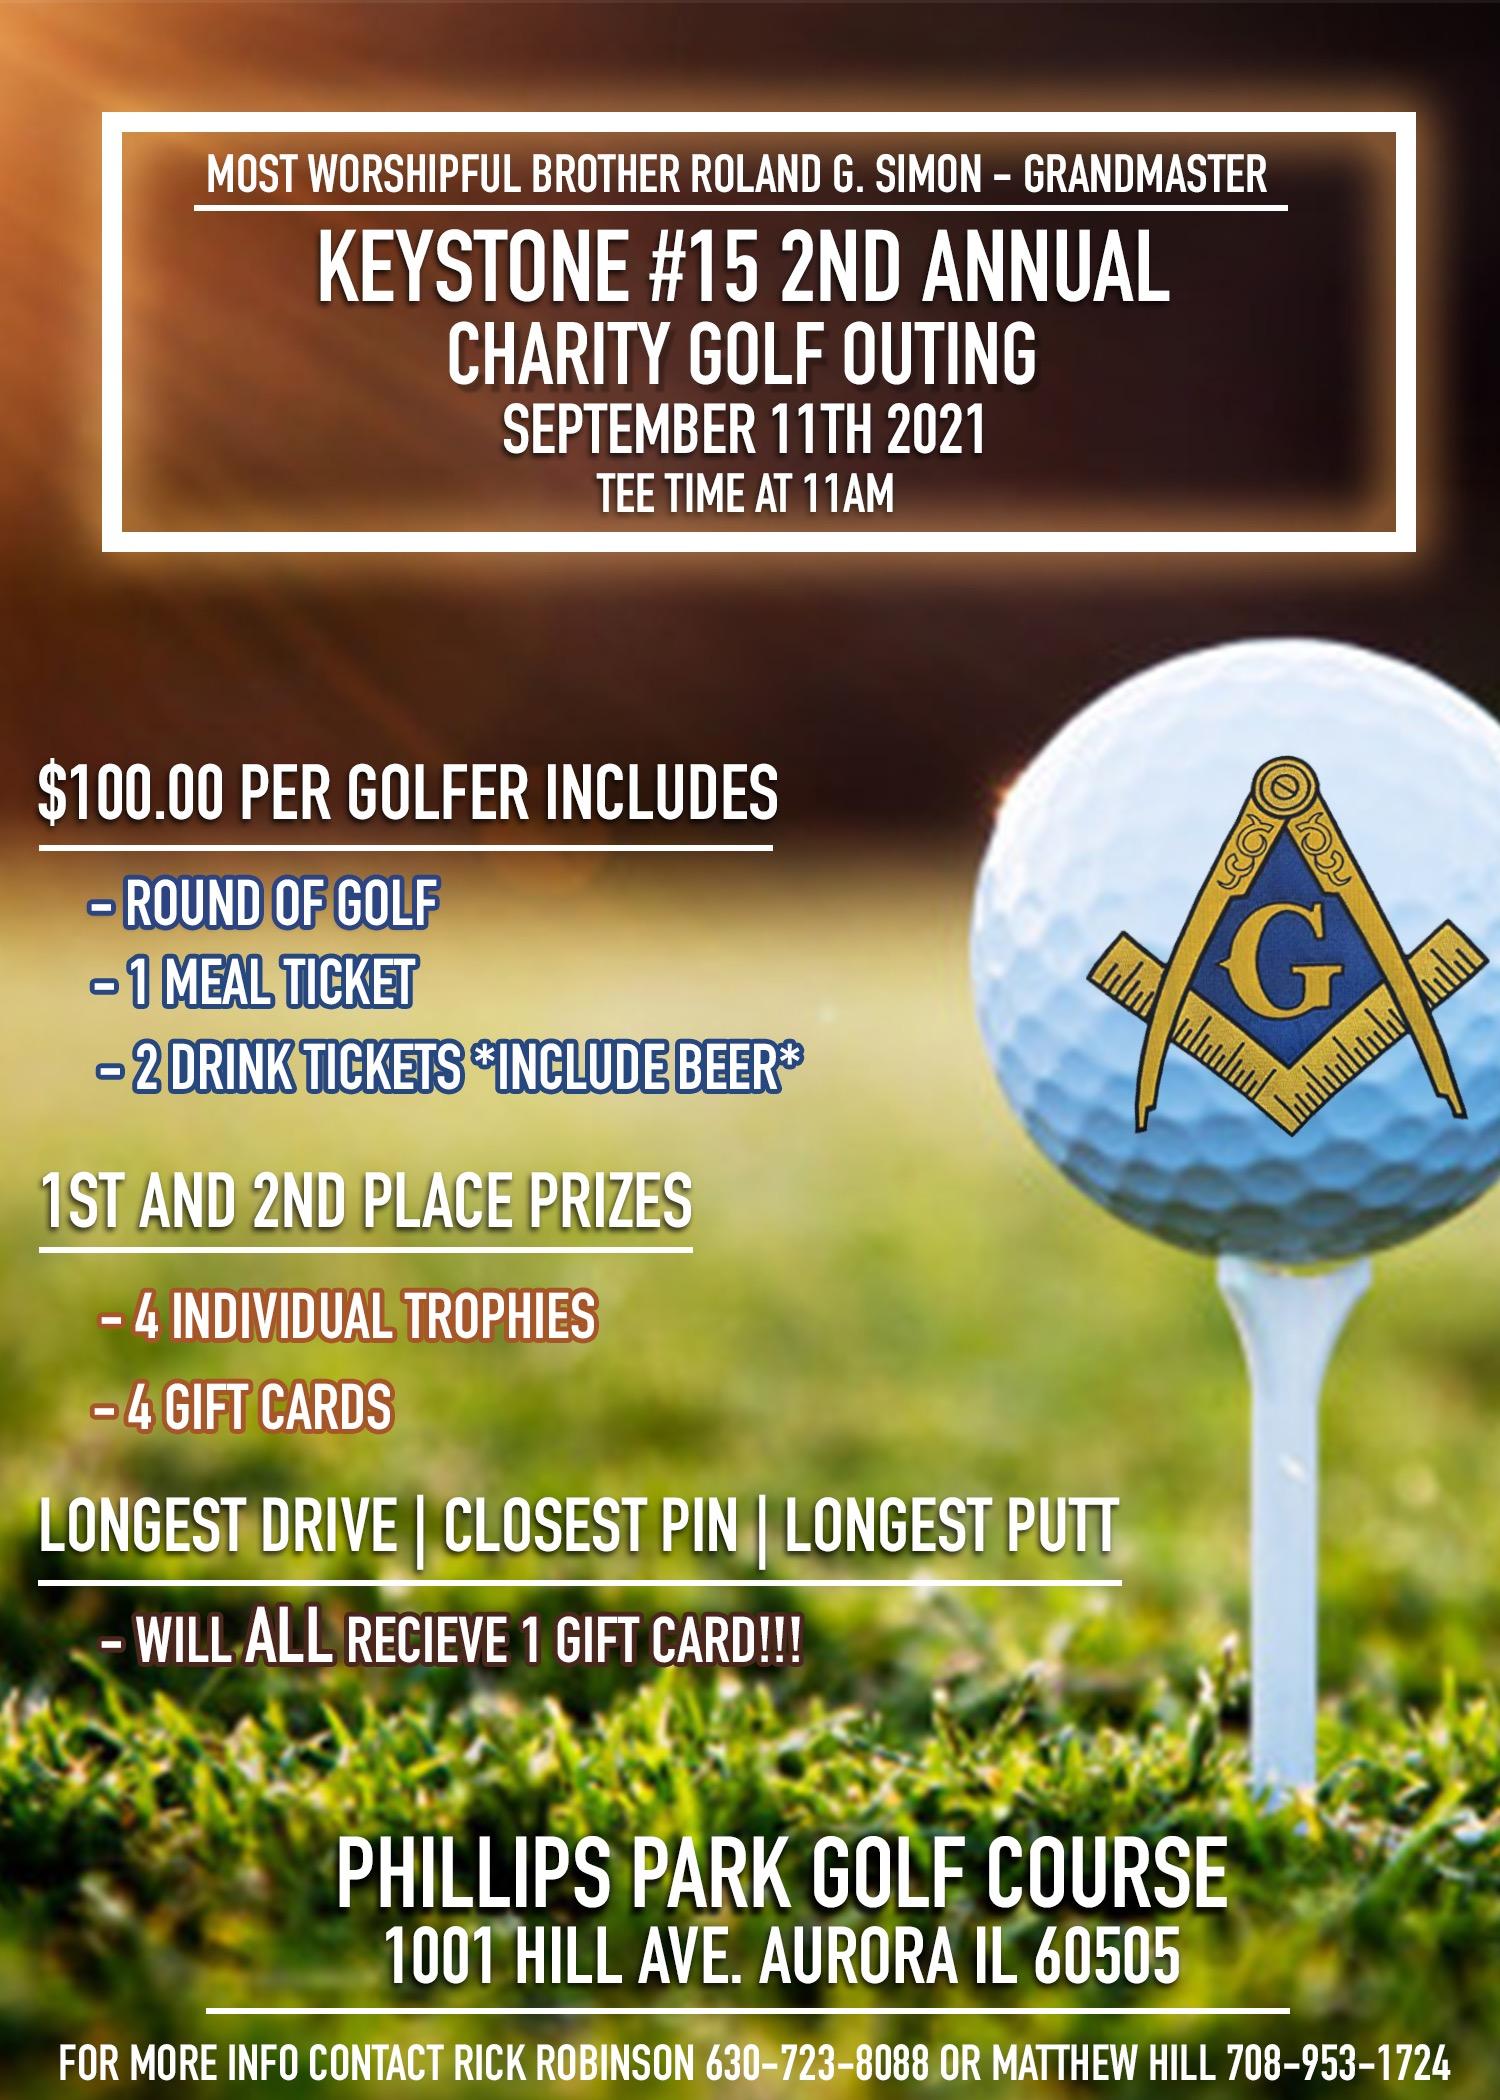 Keystone Lodge #15’s second Annual charitable Golf Outing